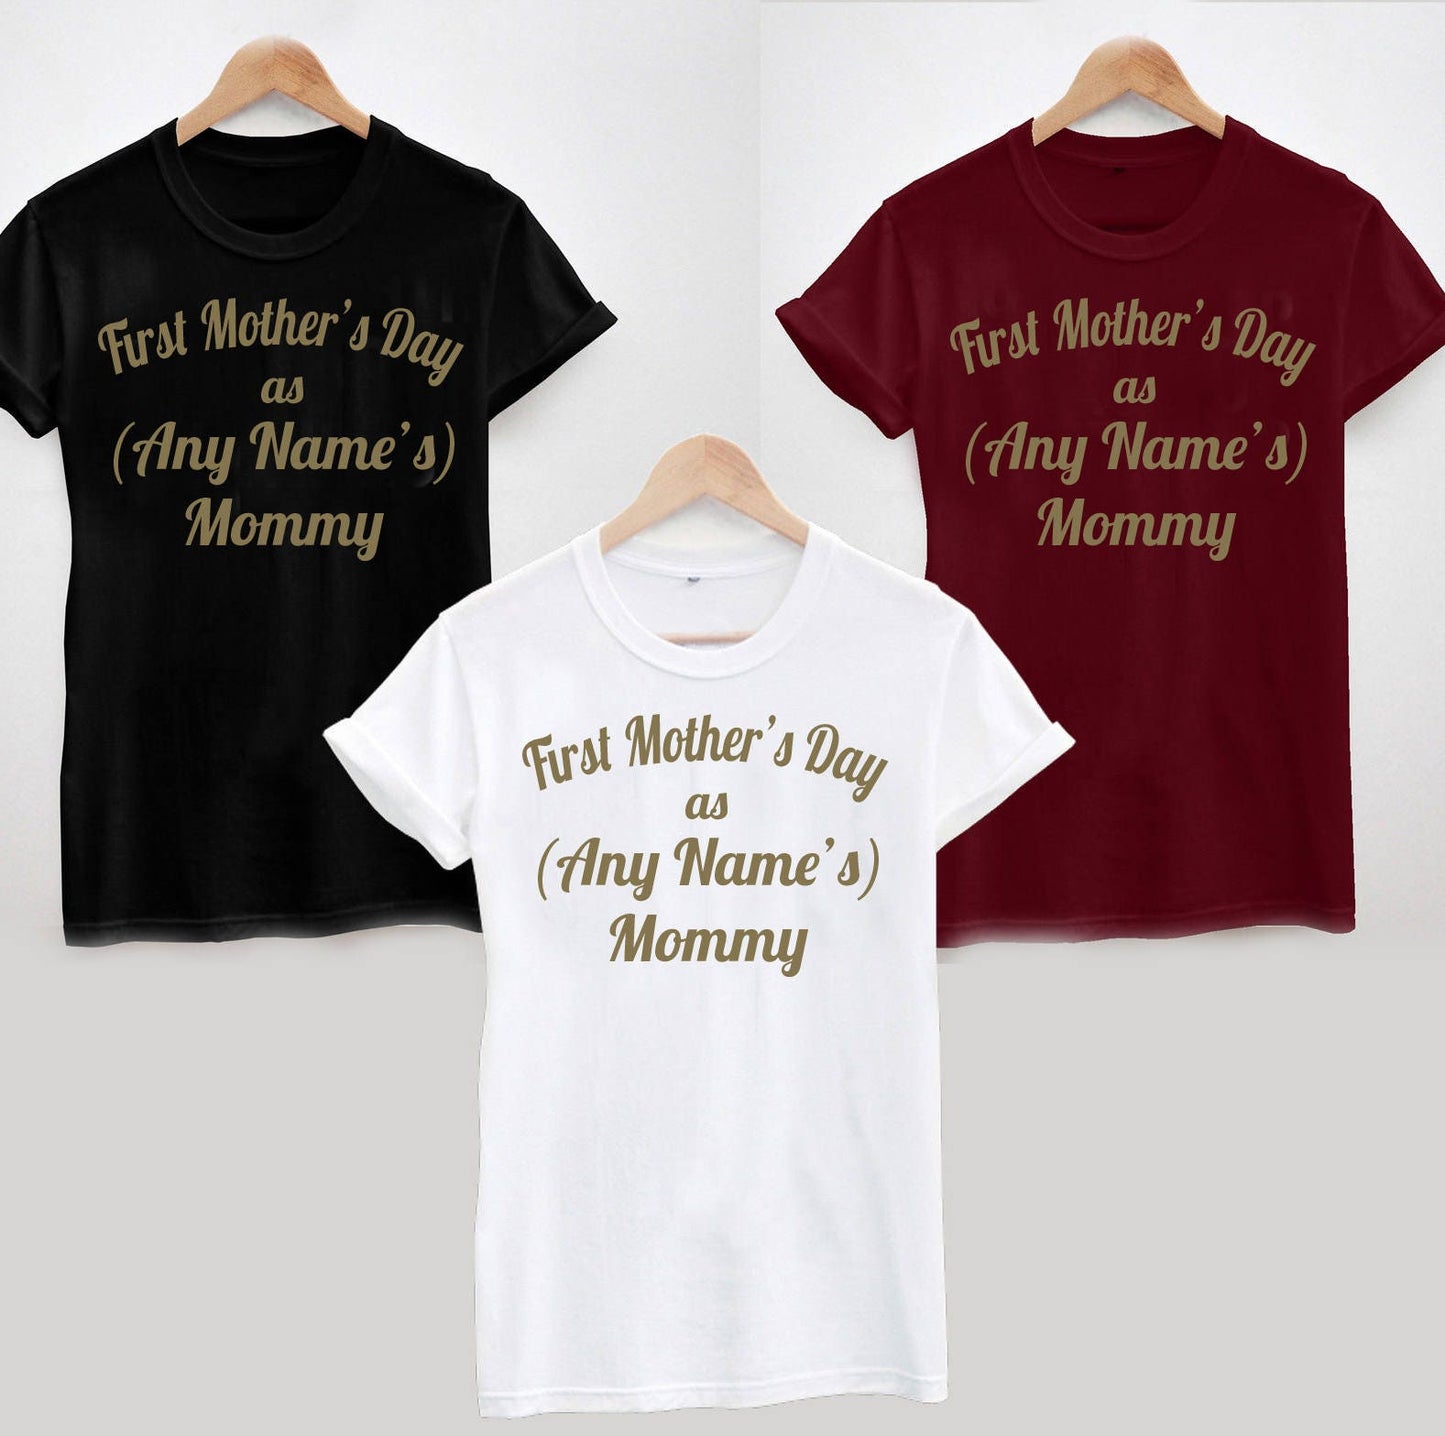 First Mother's Day as (Any Name's) MOMMY Gold Personalised T-Shirt, Ladies, Unisex